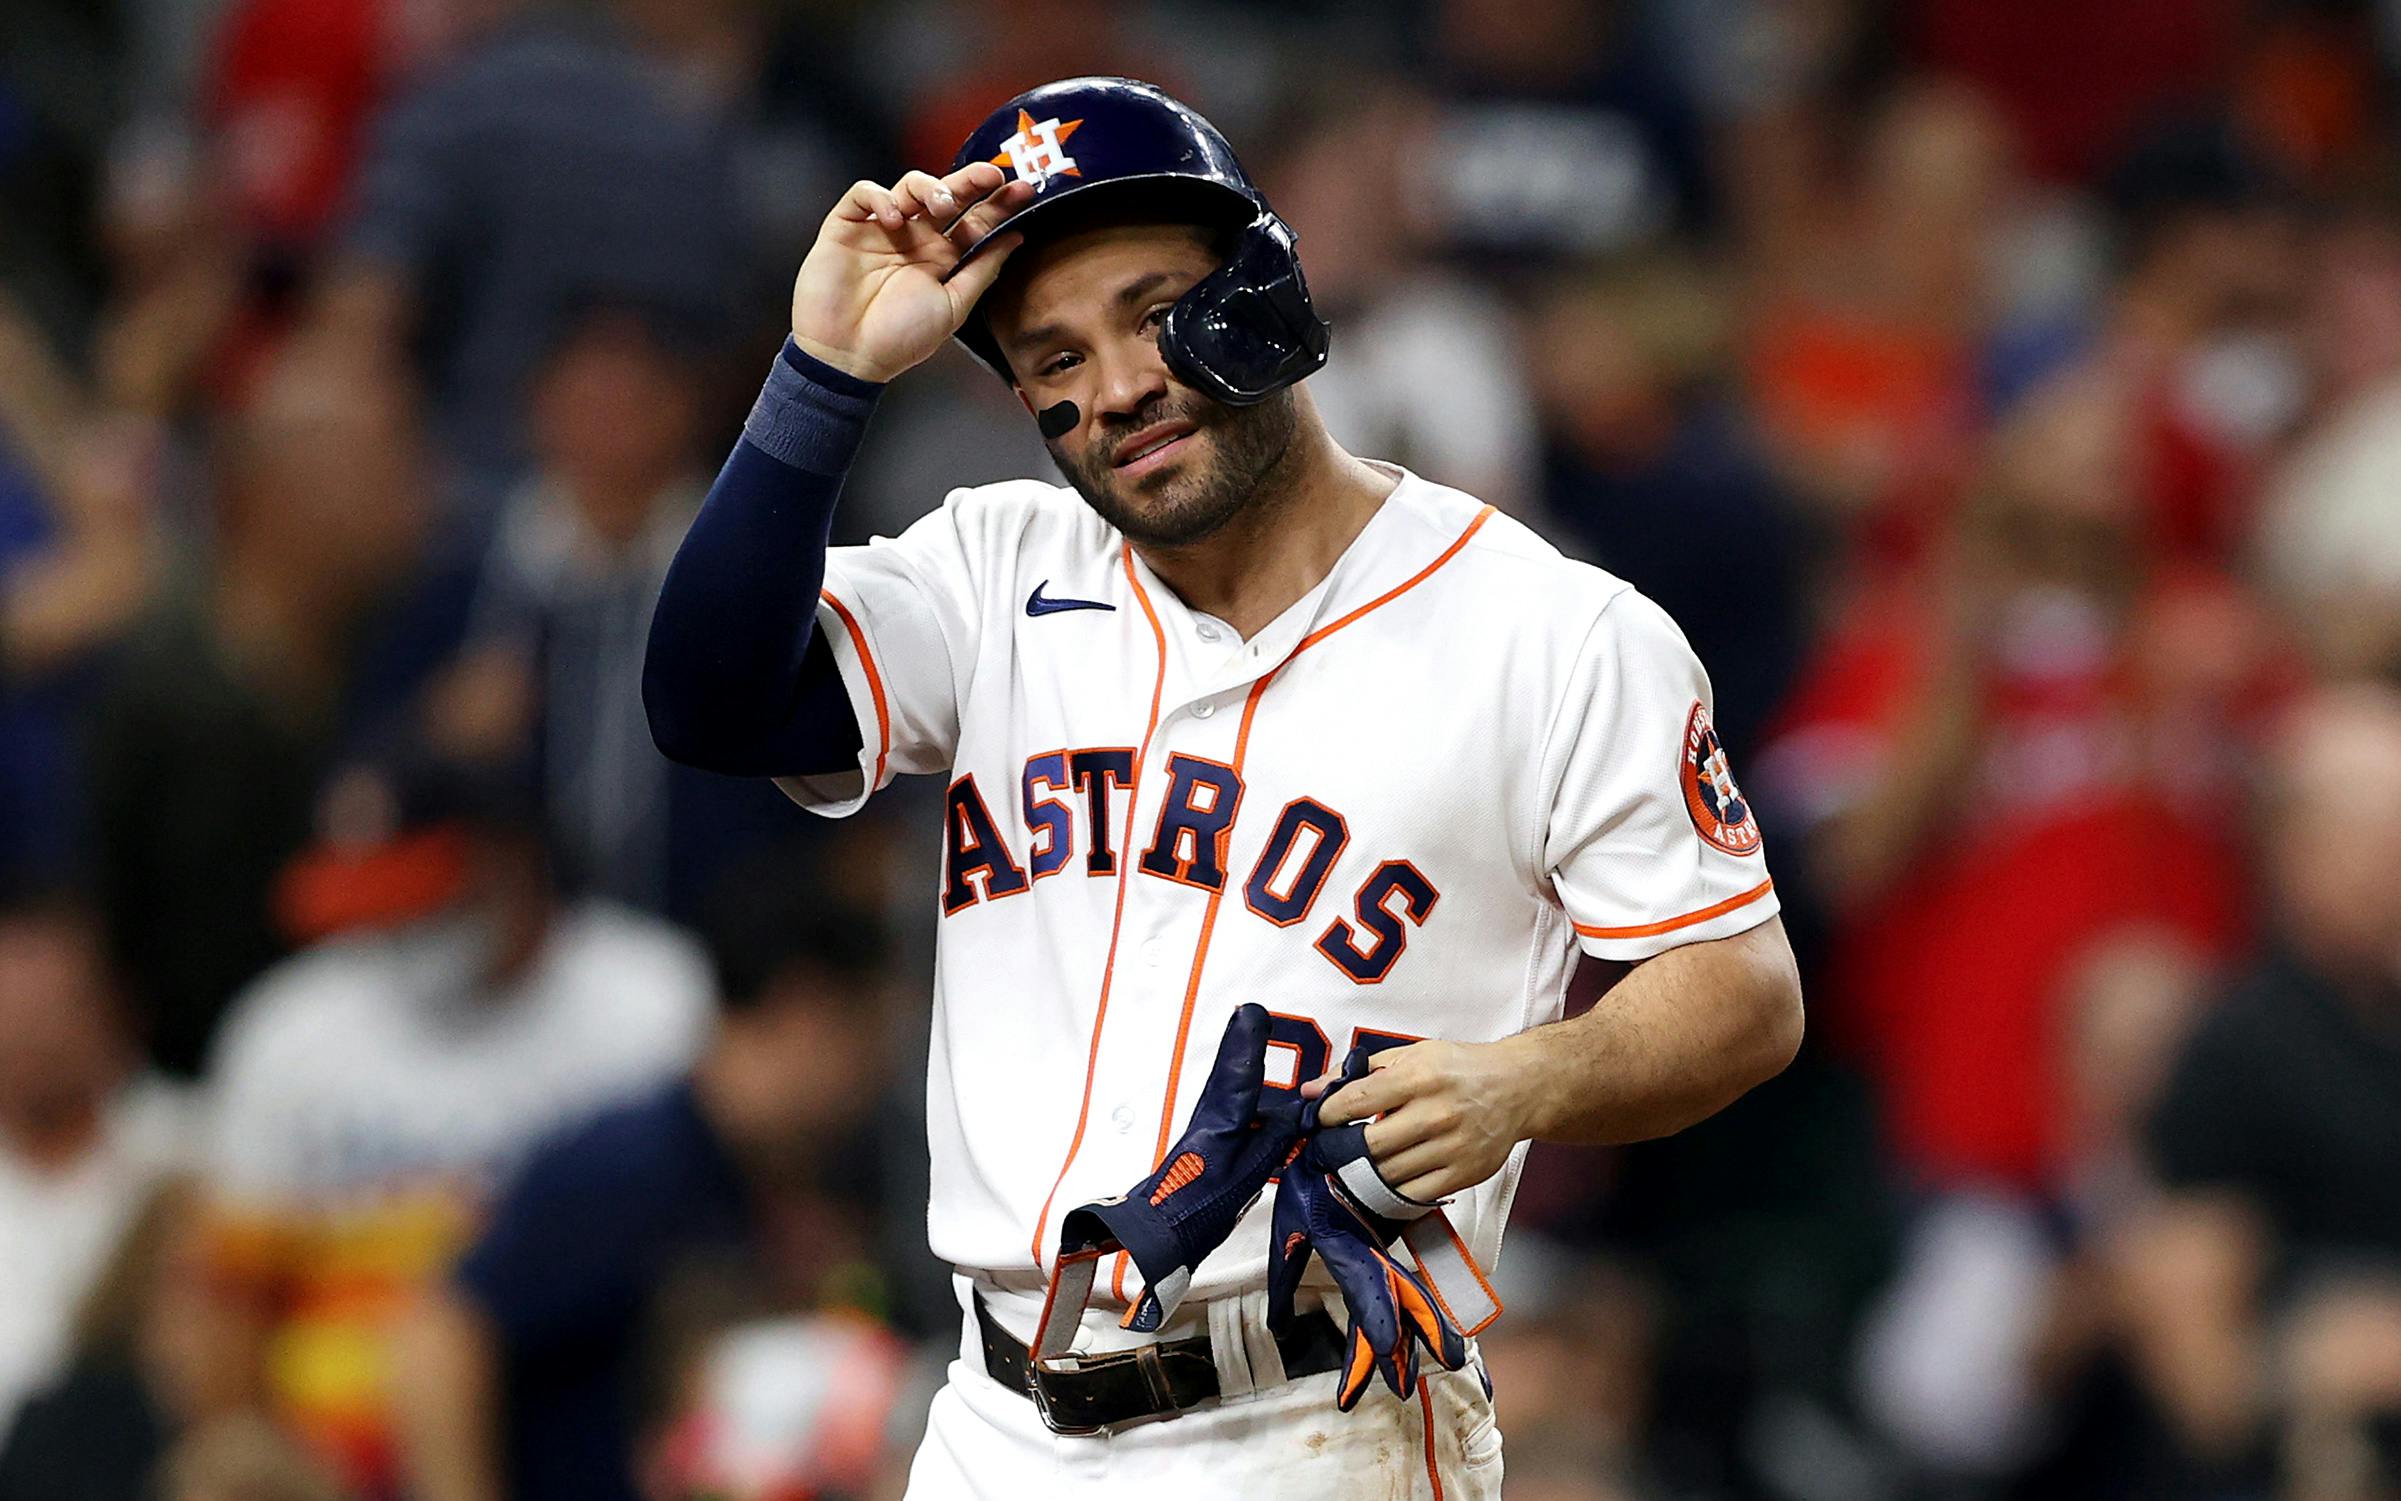 Astros' uniform tradition unlike any other in baseball